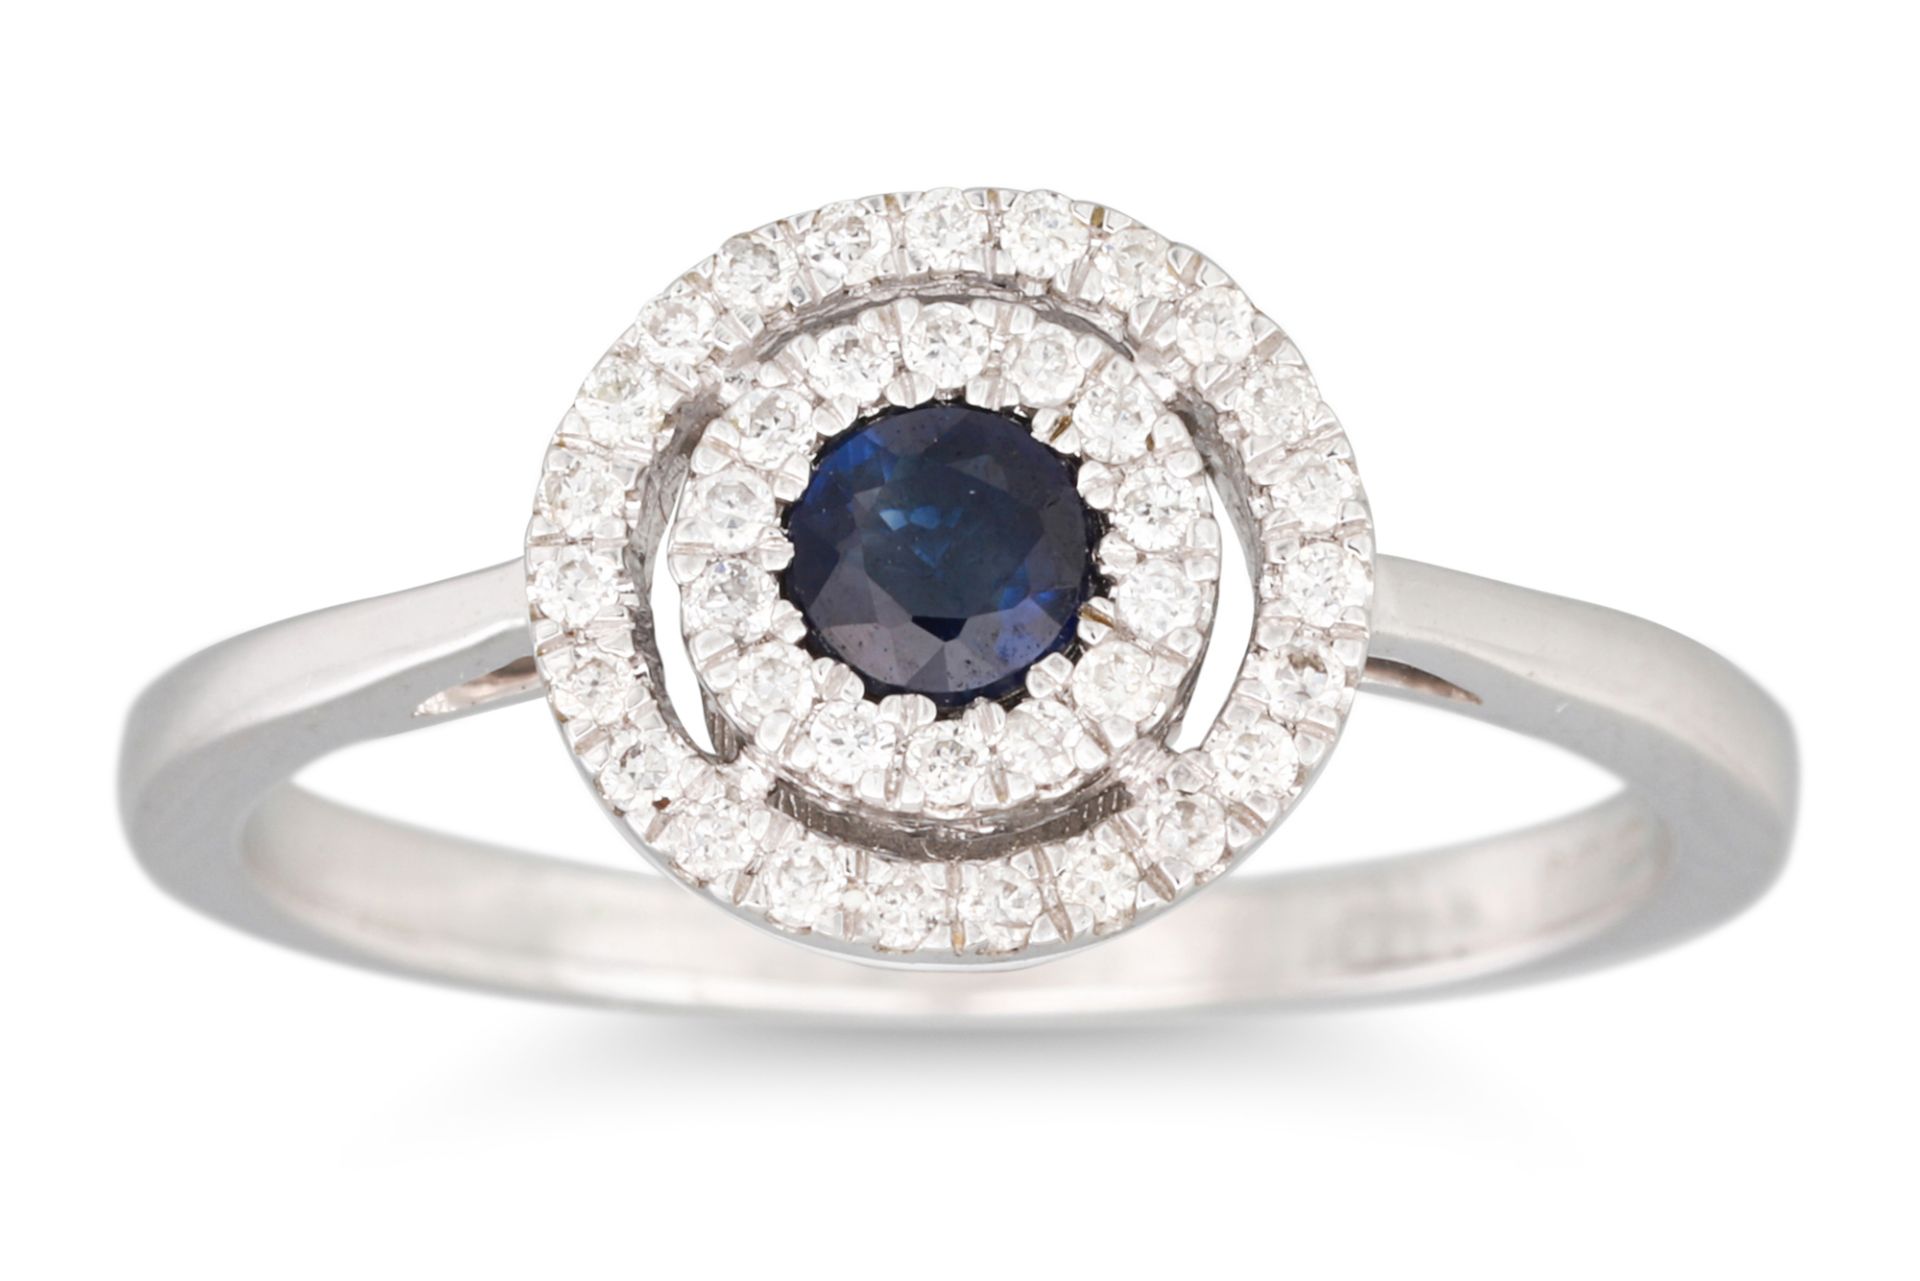 A DIAMOND AND SAPPHIRE TARGET RING, mounted in white gold, size K